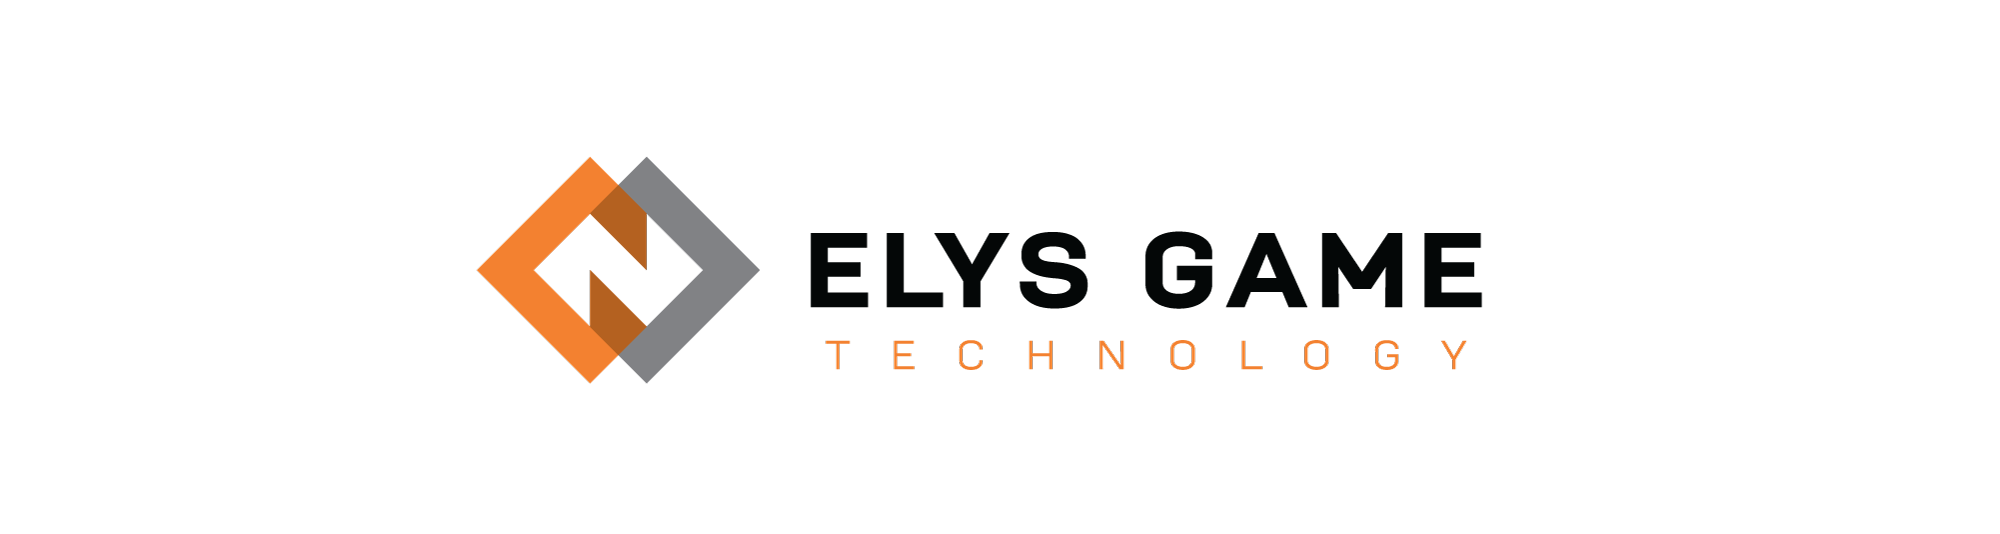 elys-subsidiary-multigioco-unveils-all-new-online-offerings-in-italy